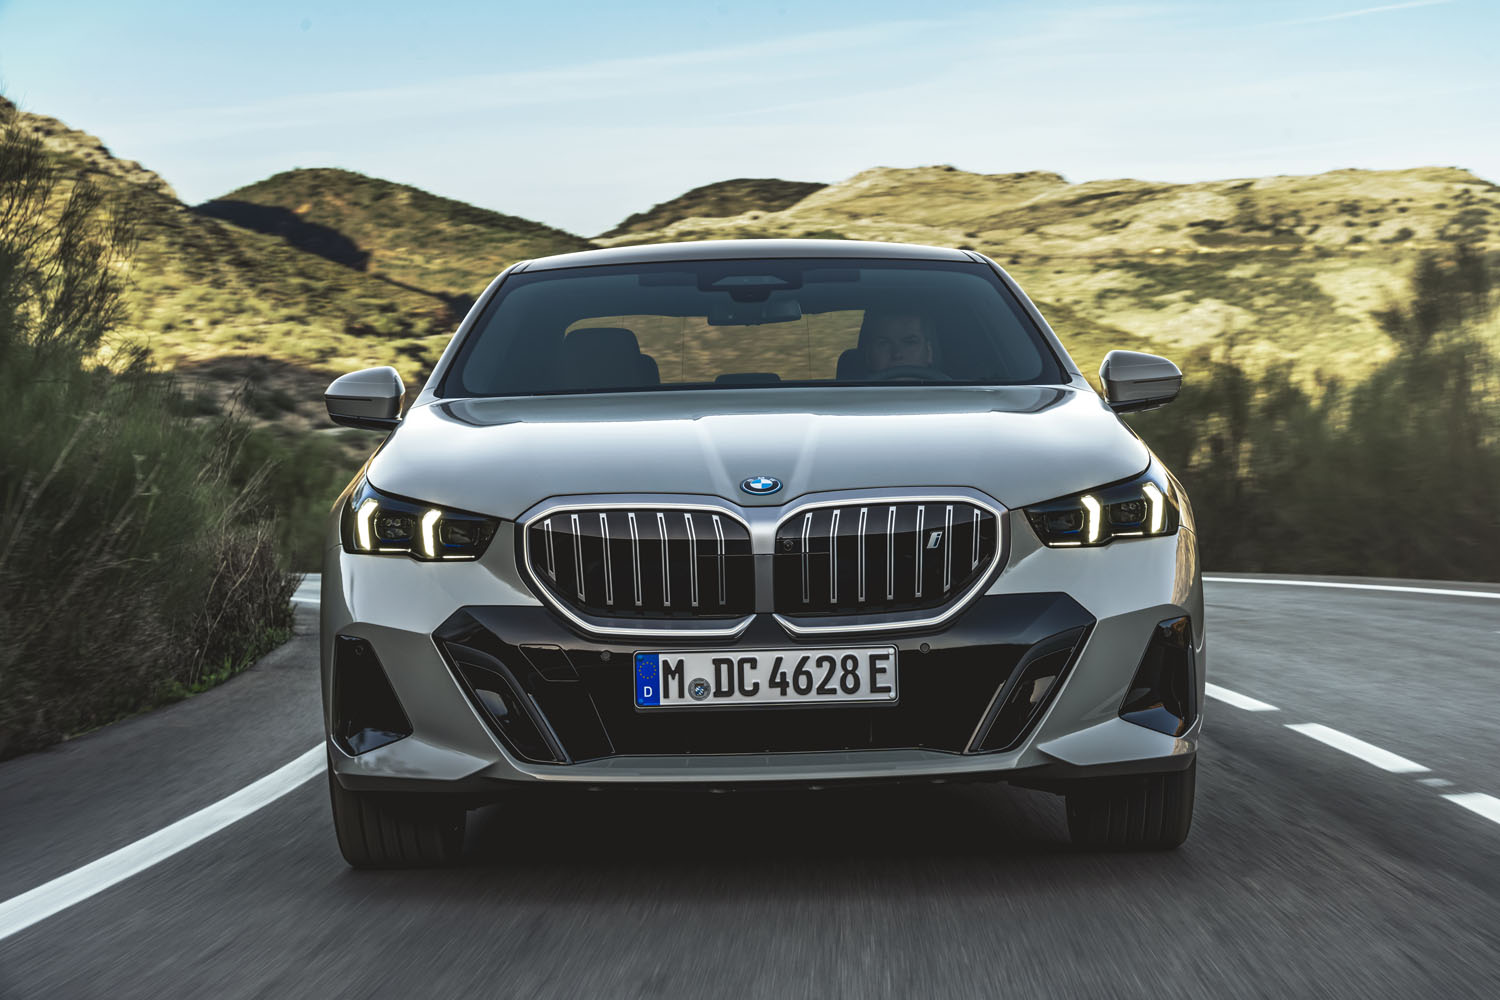 ellectric — The first-ever BMW i5